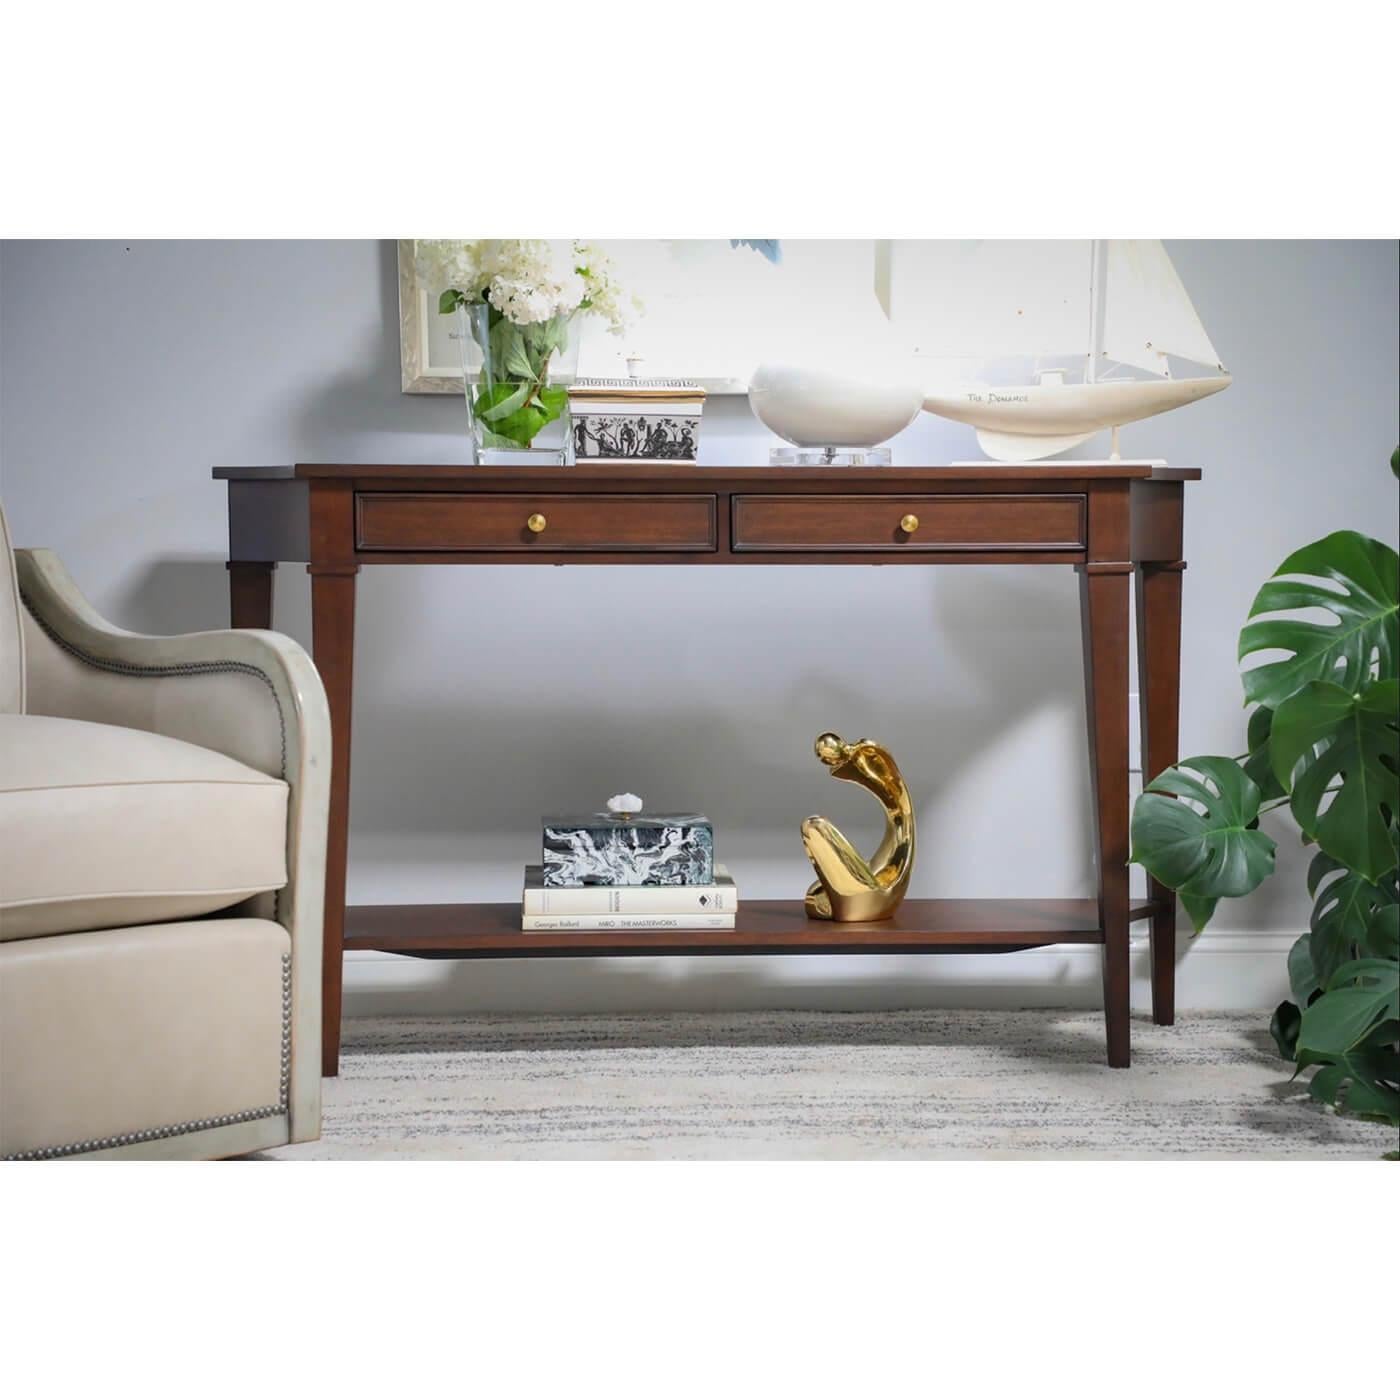 Neoclassical Classic Rustic Console Table, Mahogany Finish For Sale